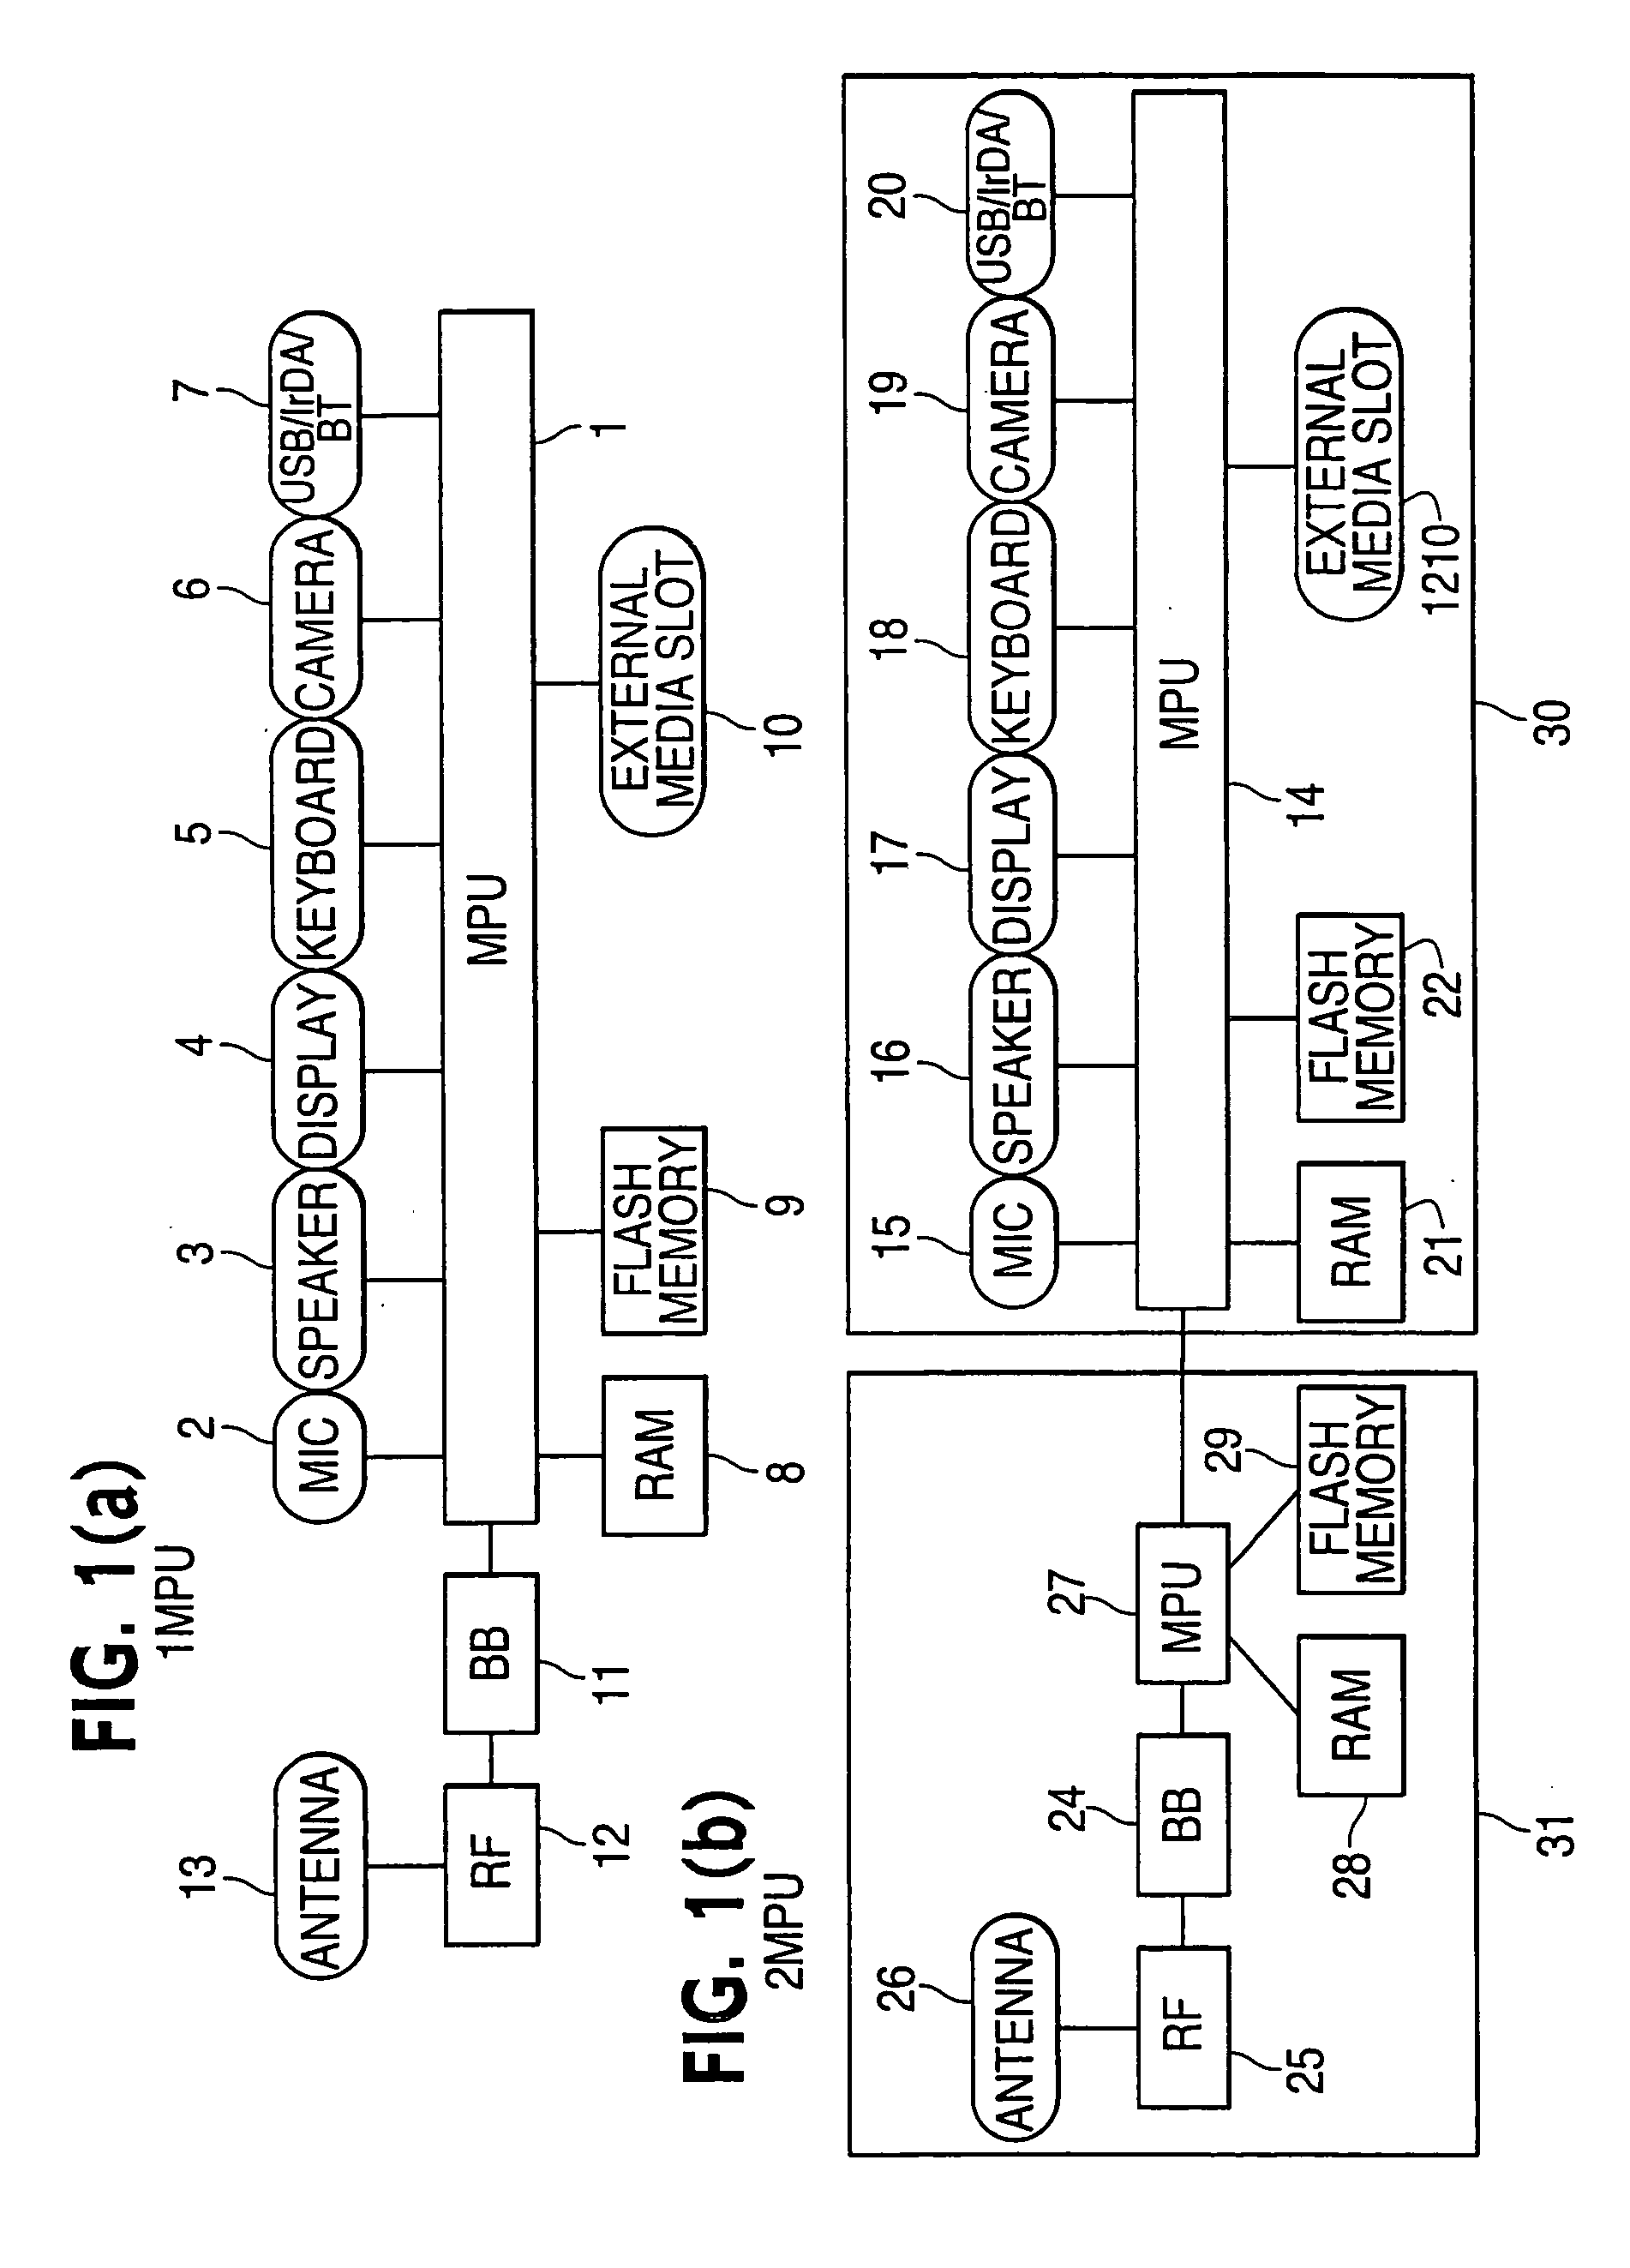 Apparatus with electronic information transfer function or the like, program for electronic information transfer, and method for electronic information transfer